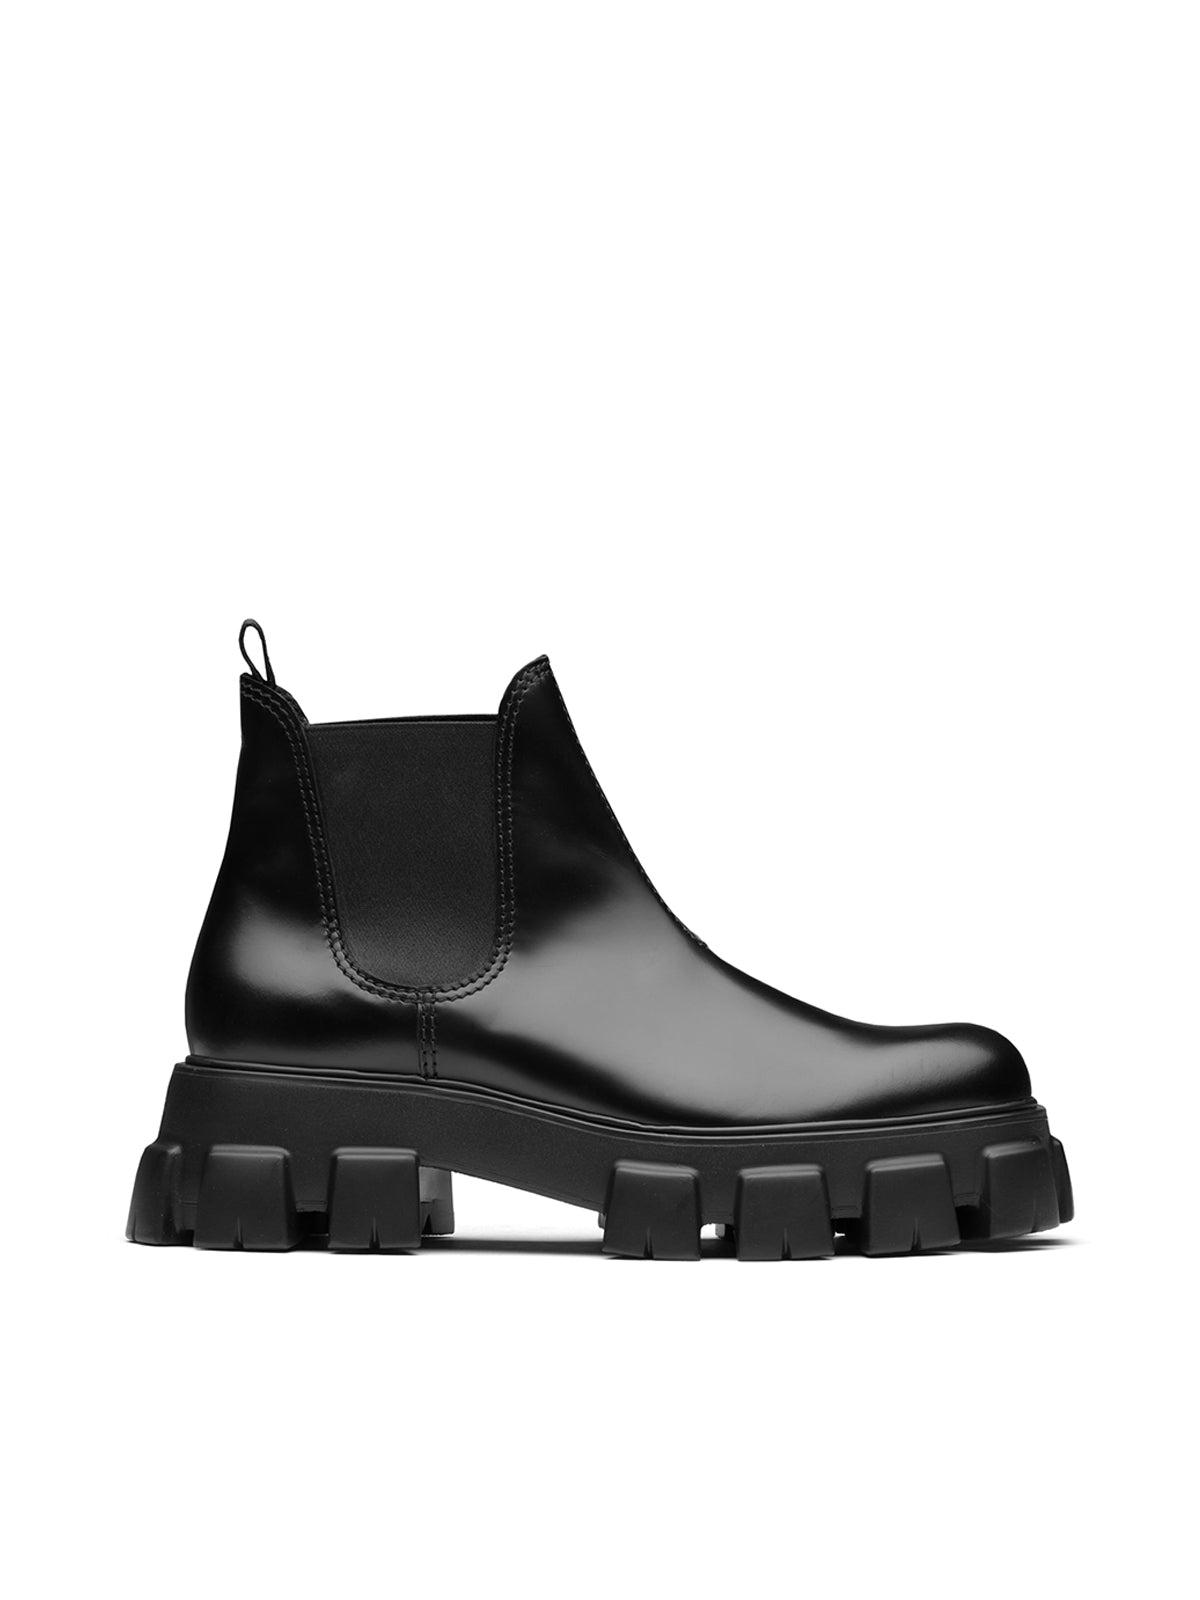 Prada Leather Monolith Boots in Black for Men - Save 13% - Lyst